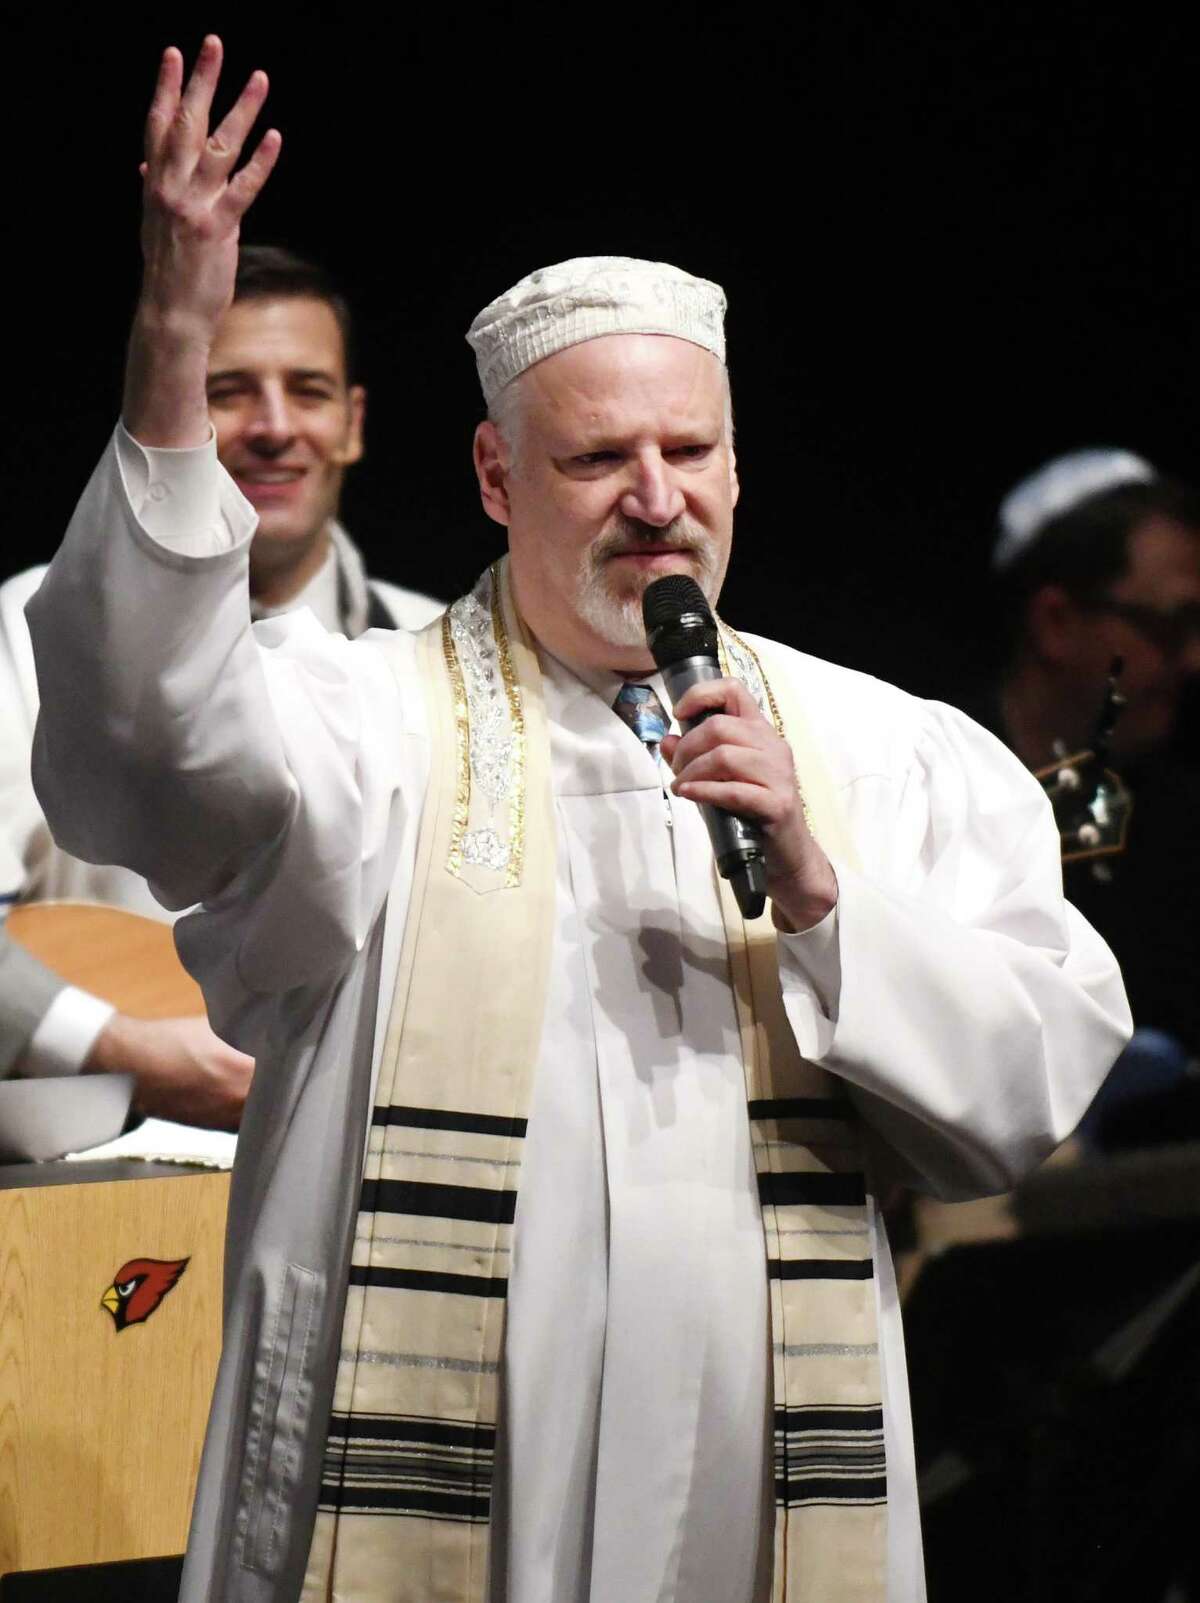 Rabbi Mitchell Hurvitz leads a song during Temple Sholom's Yom Kippur family service at Greenwich High School in Greenwich, Conn. Wednesday, Oct. 5, 2022. Congregants celebrated the Jewish day of atonement with song and prayer in Greenwich's High School's performing arts center.